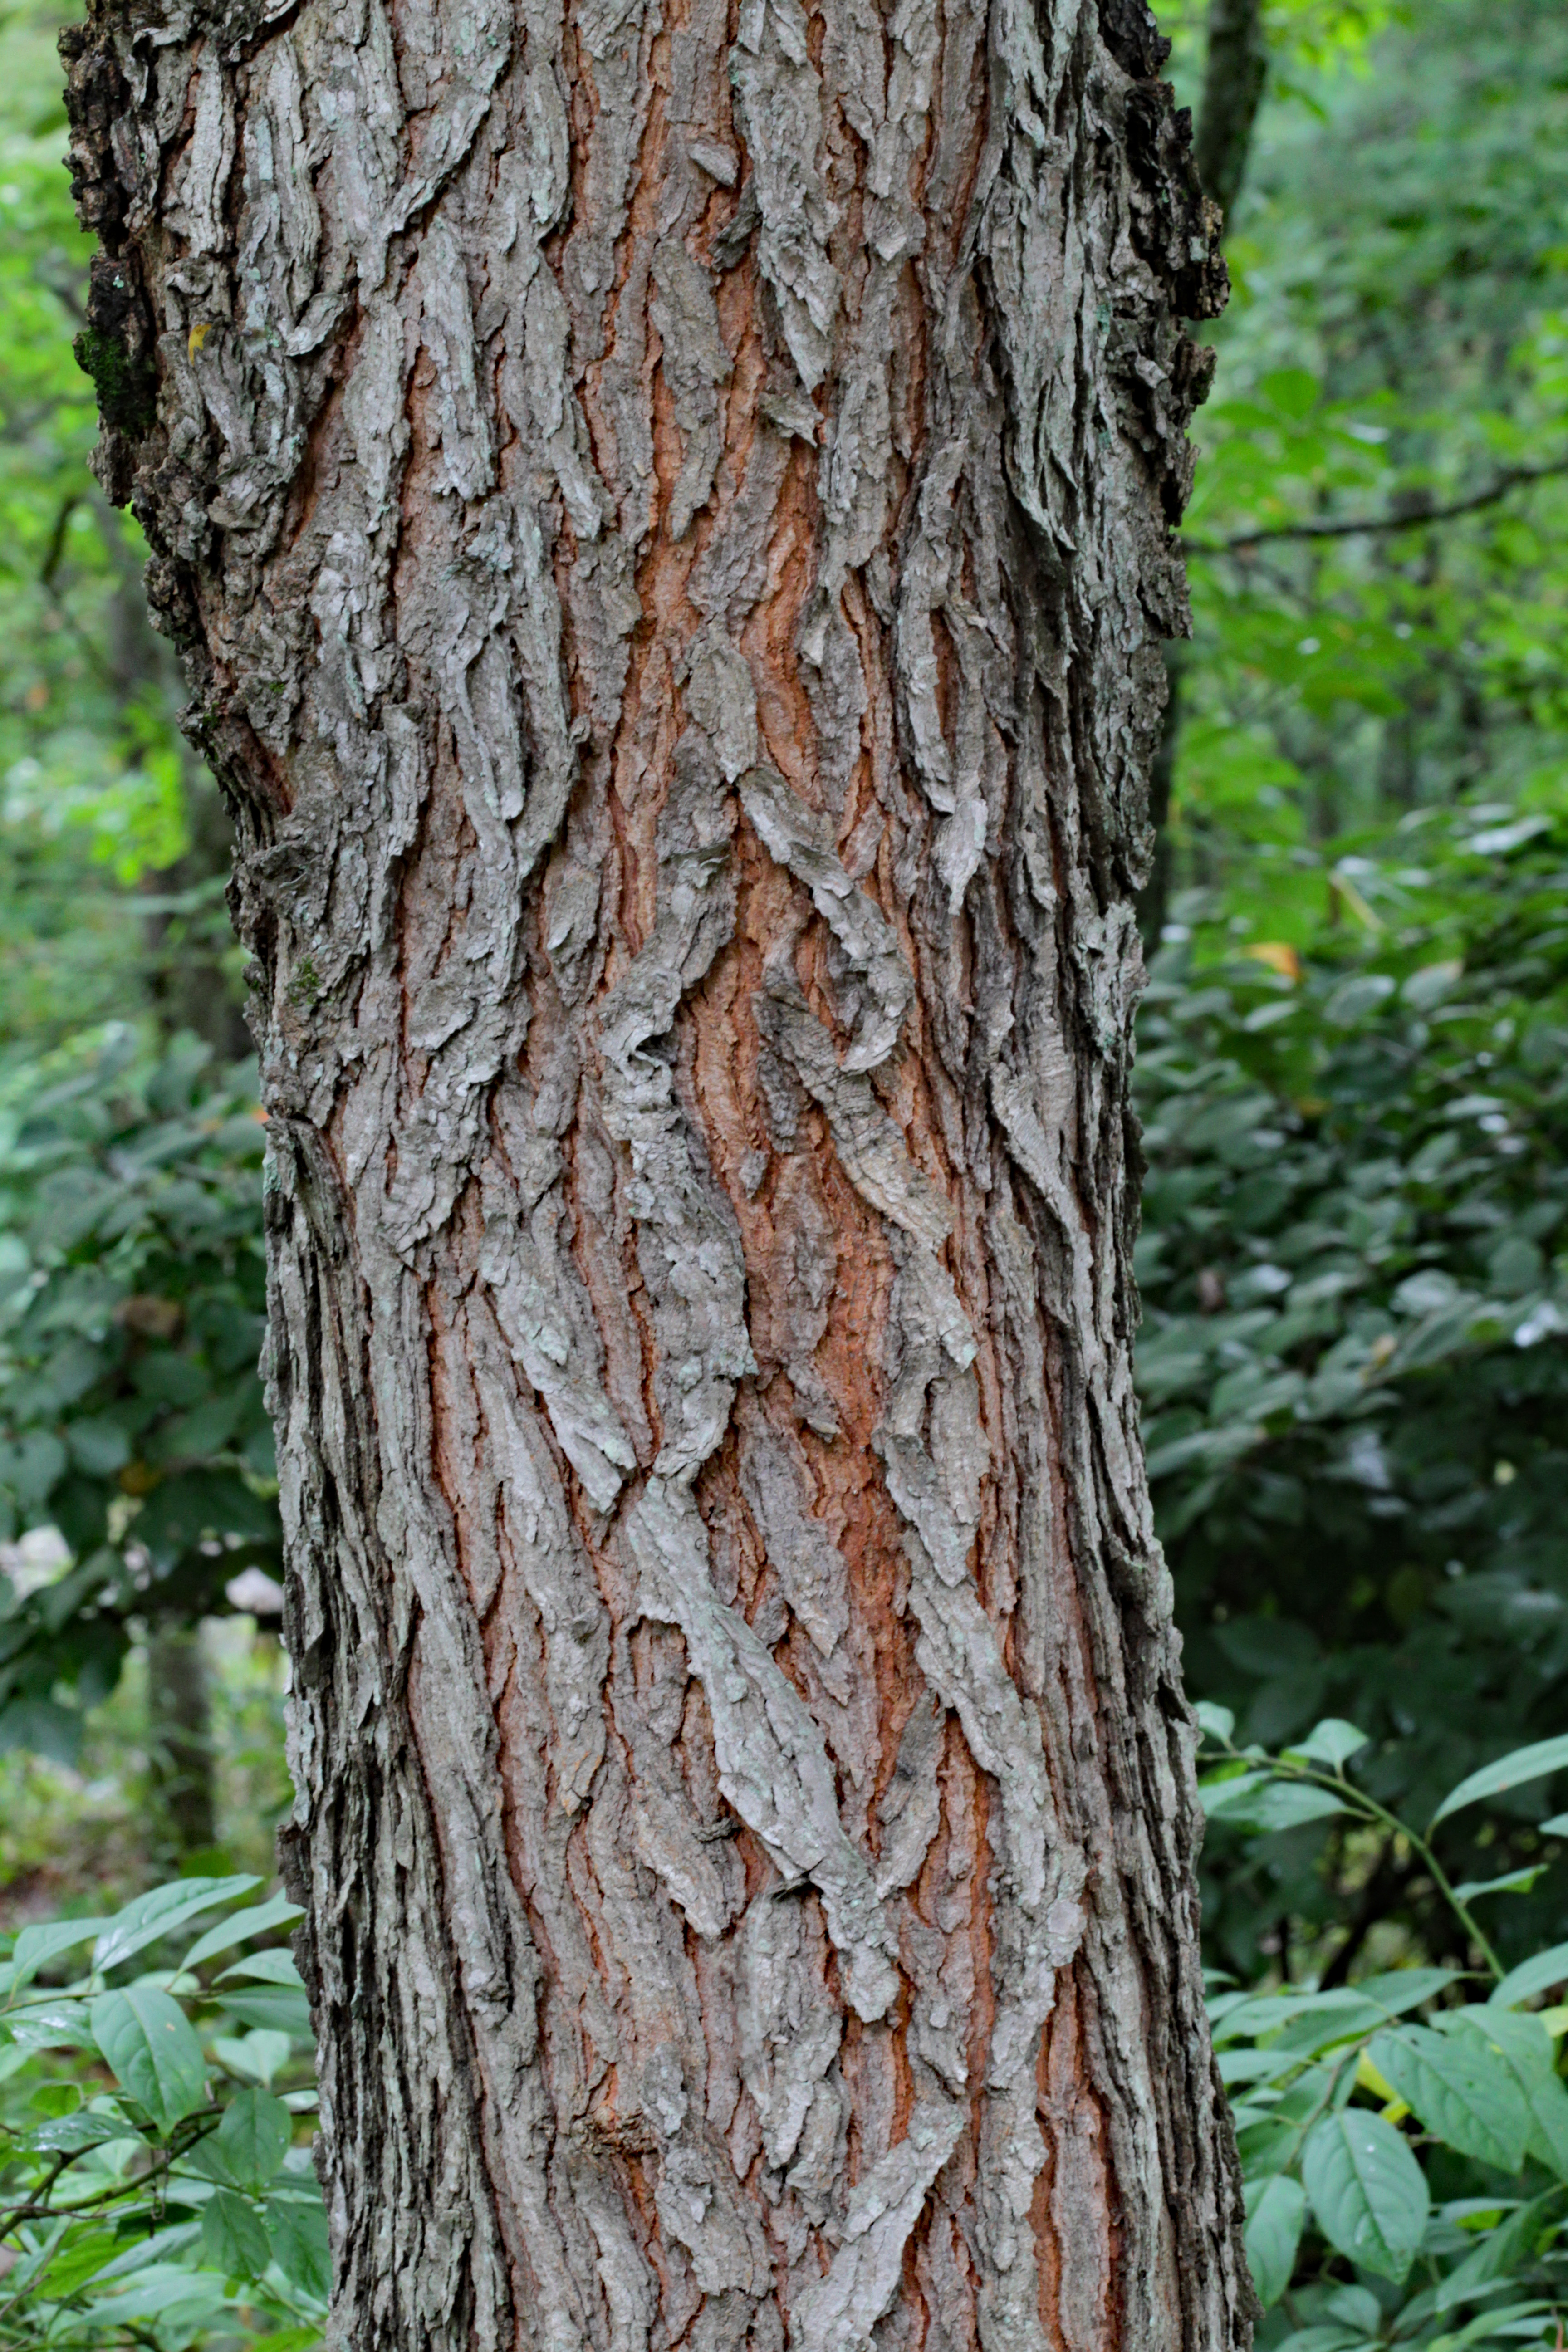 The Scientific Name is Gymnocladus dioicus. You will likely hear them called Kentucky Coffeetree, Kentucky Mahogany. This picture shows the The bark of mature Kentucky Coffee trees is deeply fissured and very attractive. of Gymnocladus dioicus